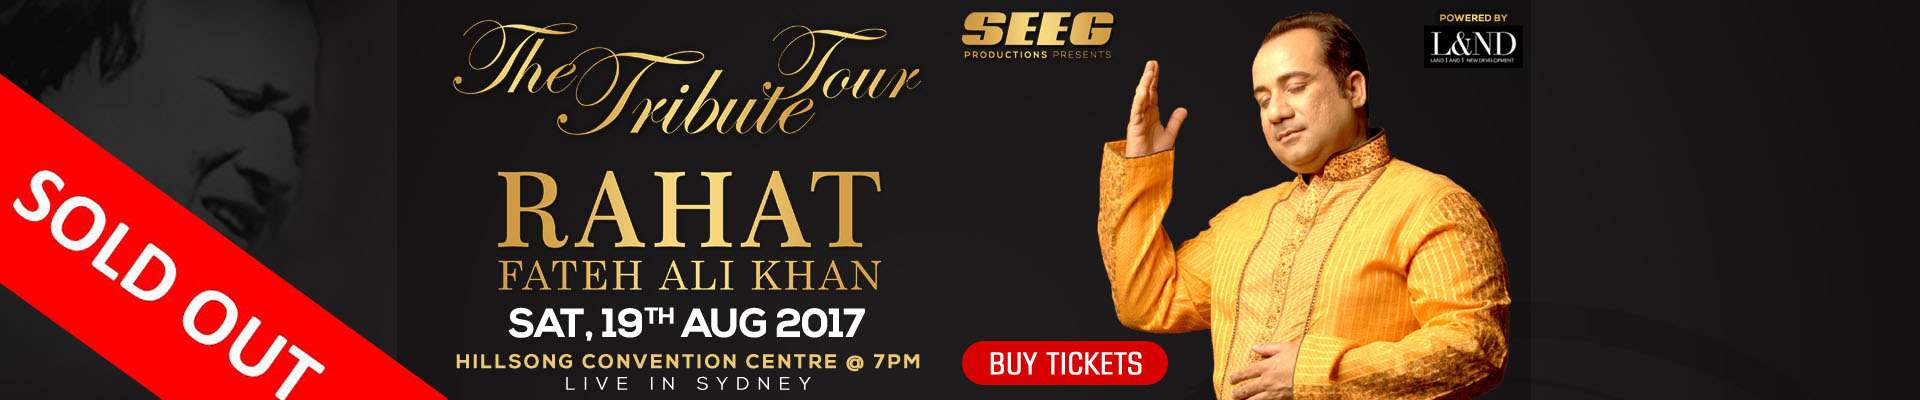 The Tribute Tour by Ustad Rahat Fateh Ali Khan In Sydney 2017